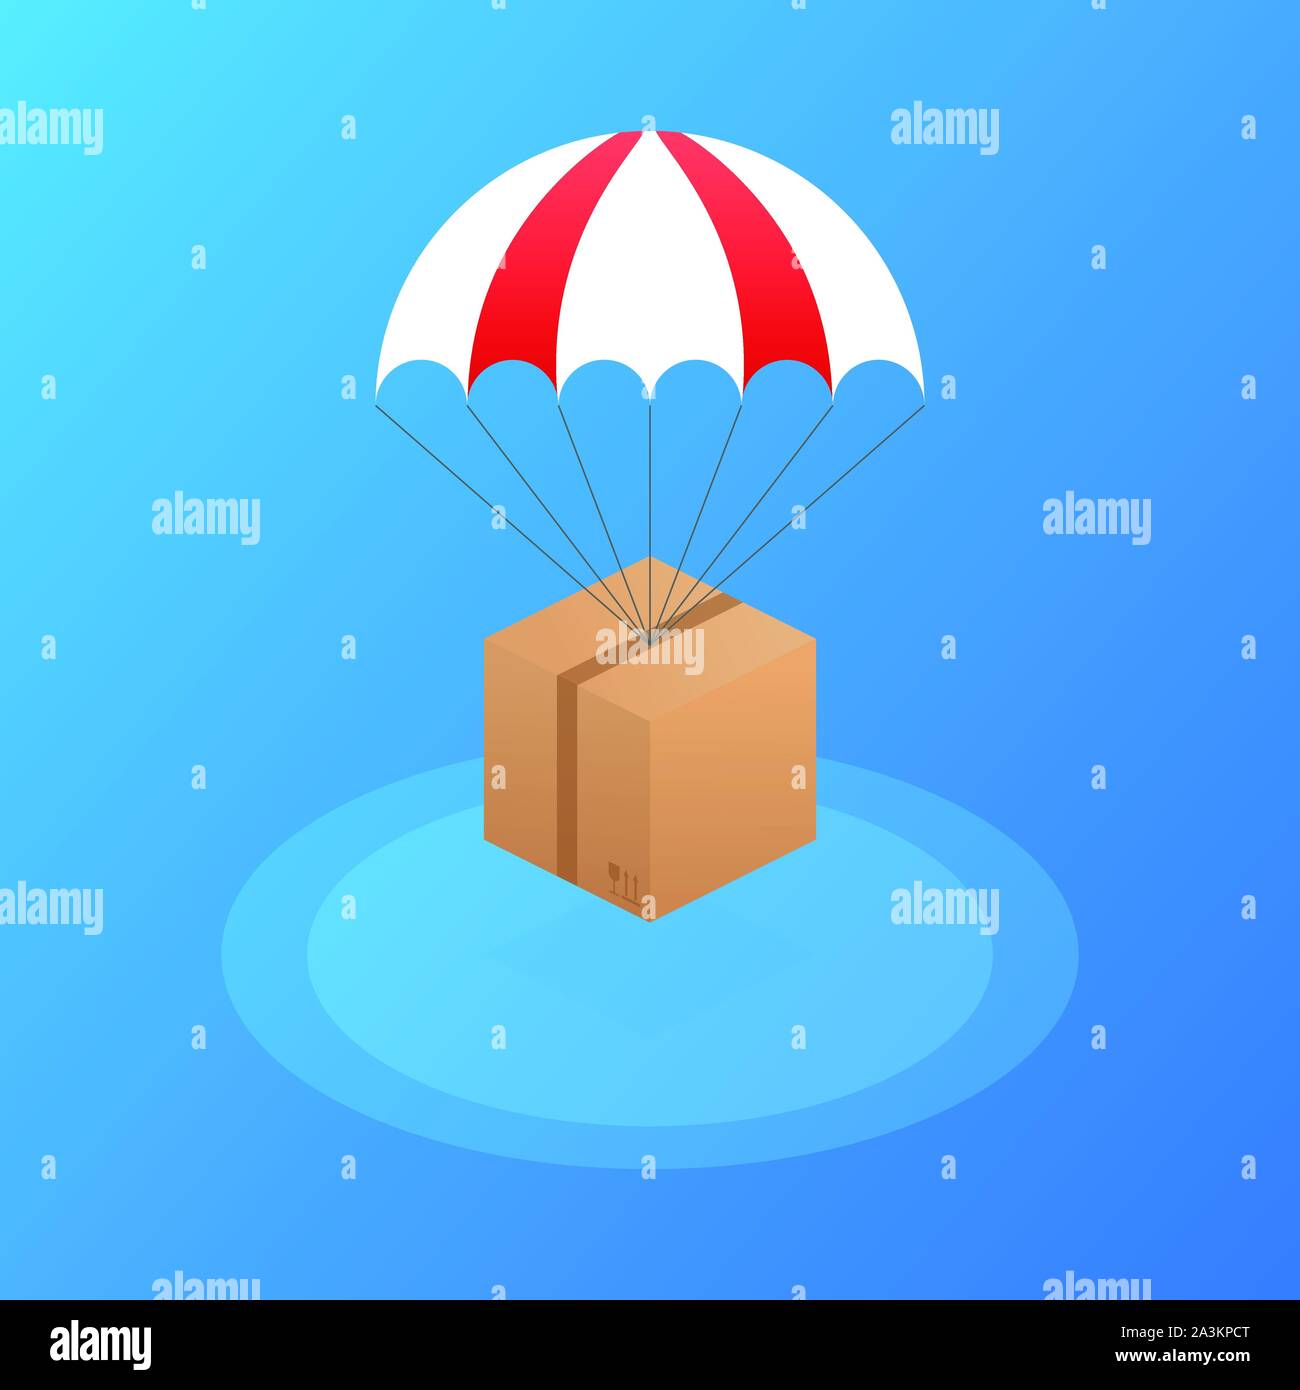 Web banner for Delivery Services and E-Commerce. Packages are flying on parachutes. Vector stock illustration. Stock Vector